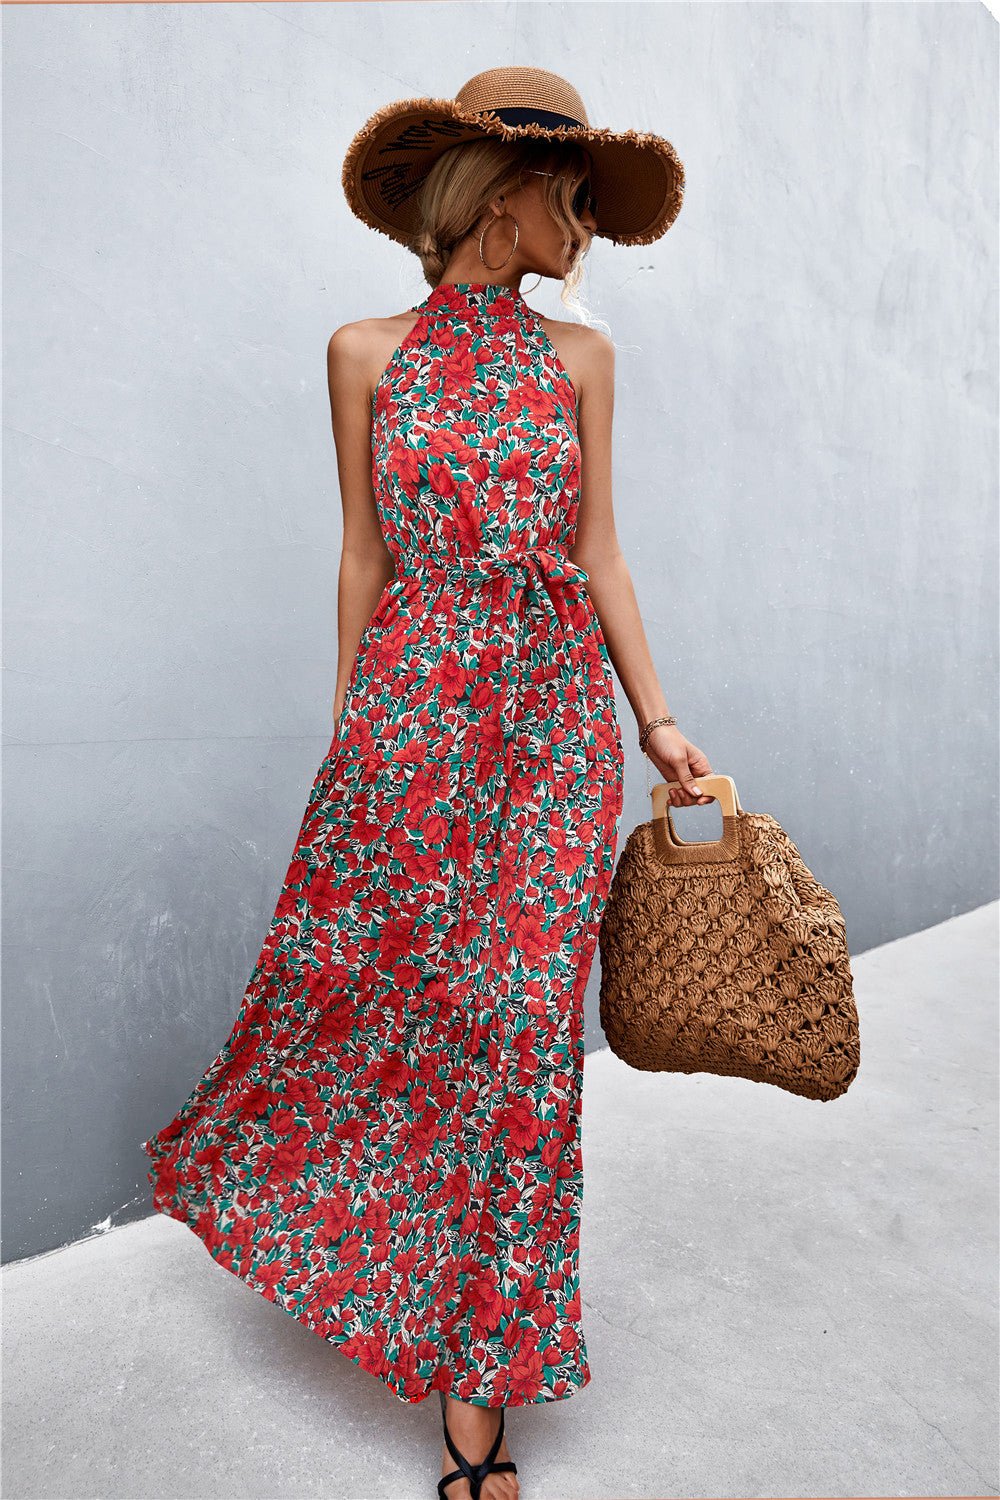 Let Me Remind You Printed Maxi Dress - red floral maxi dress with halter neck and tie waist. #Firefly Lane Boutique1